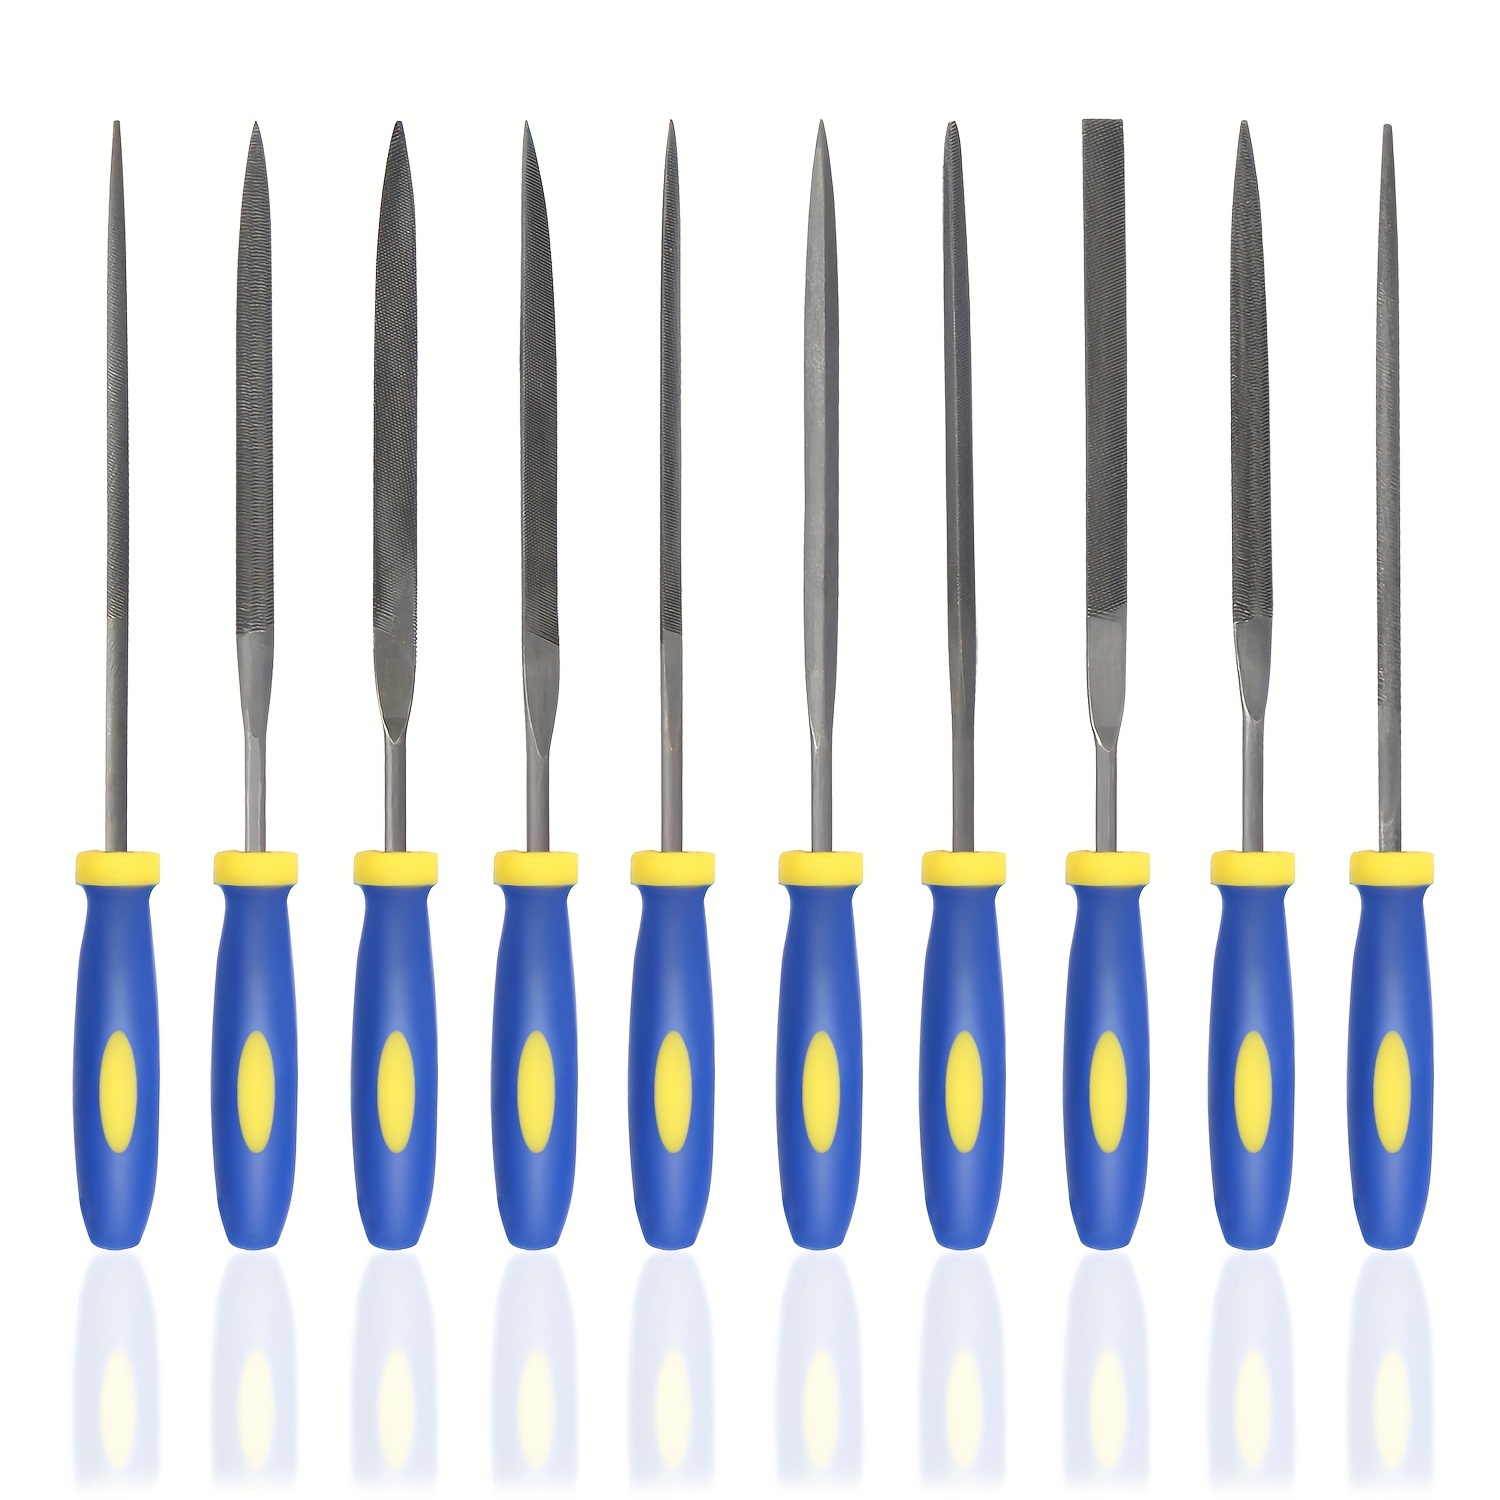 

10pcs Needle File Set High Carbon Steel File Set With Plastic Non-slip Handle, Hand Metal Tools For Wood, Plastic, Model, Jewelry, Musical Instrument And Diy (6 Inch Total Length)